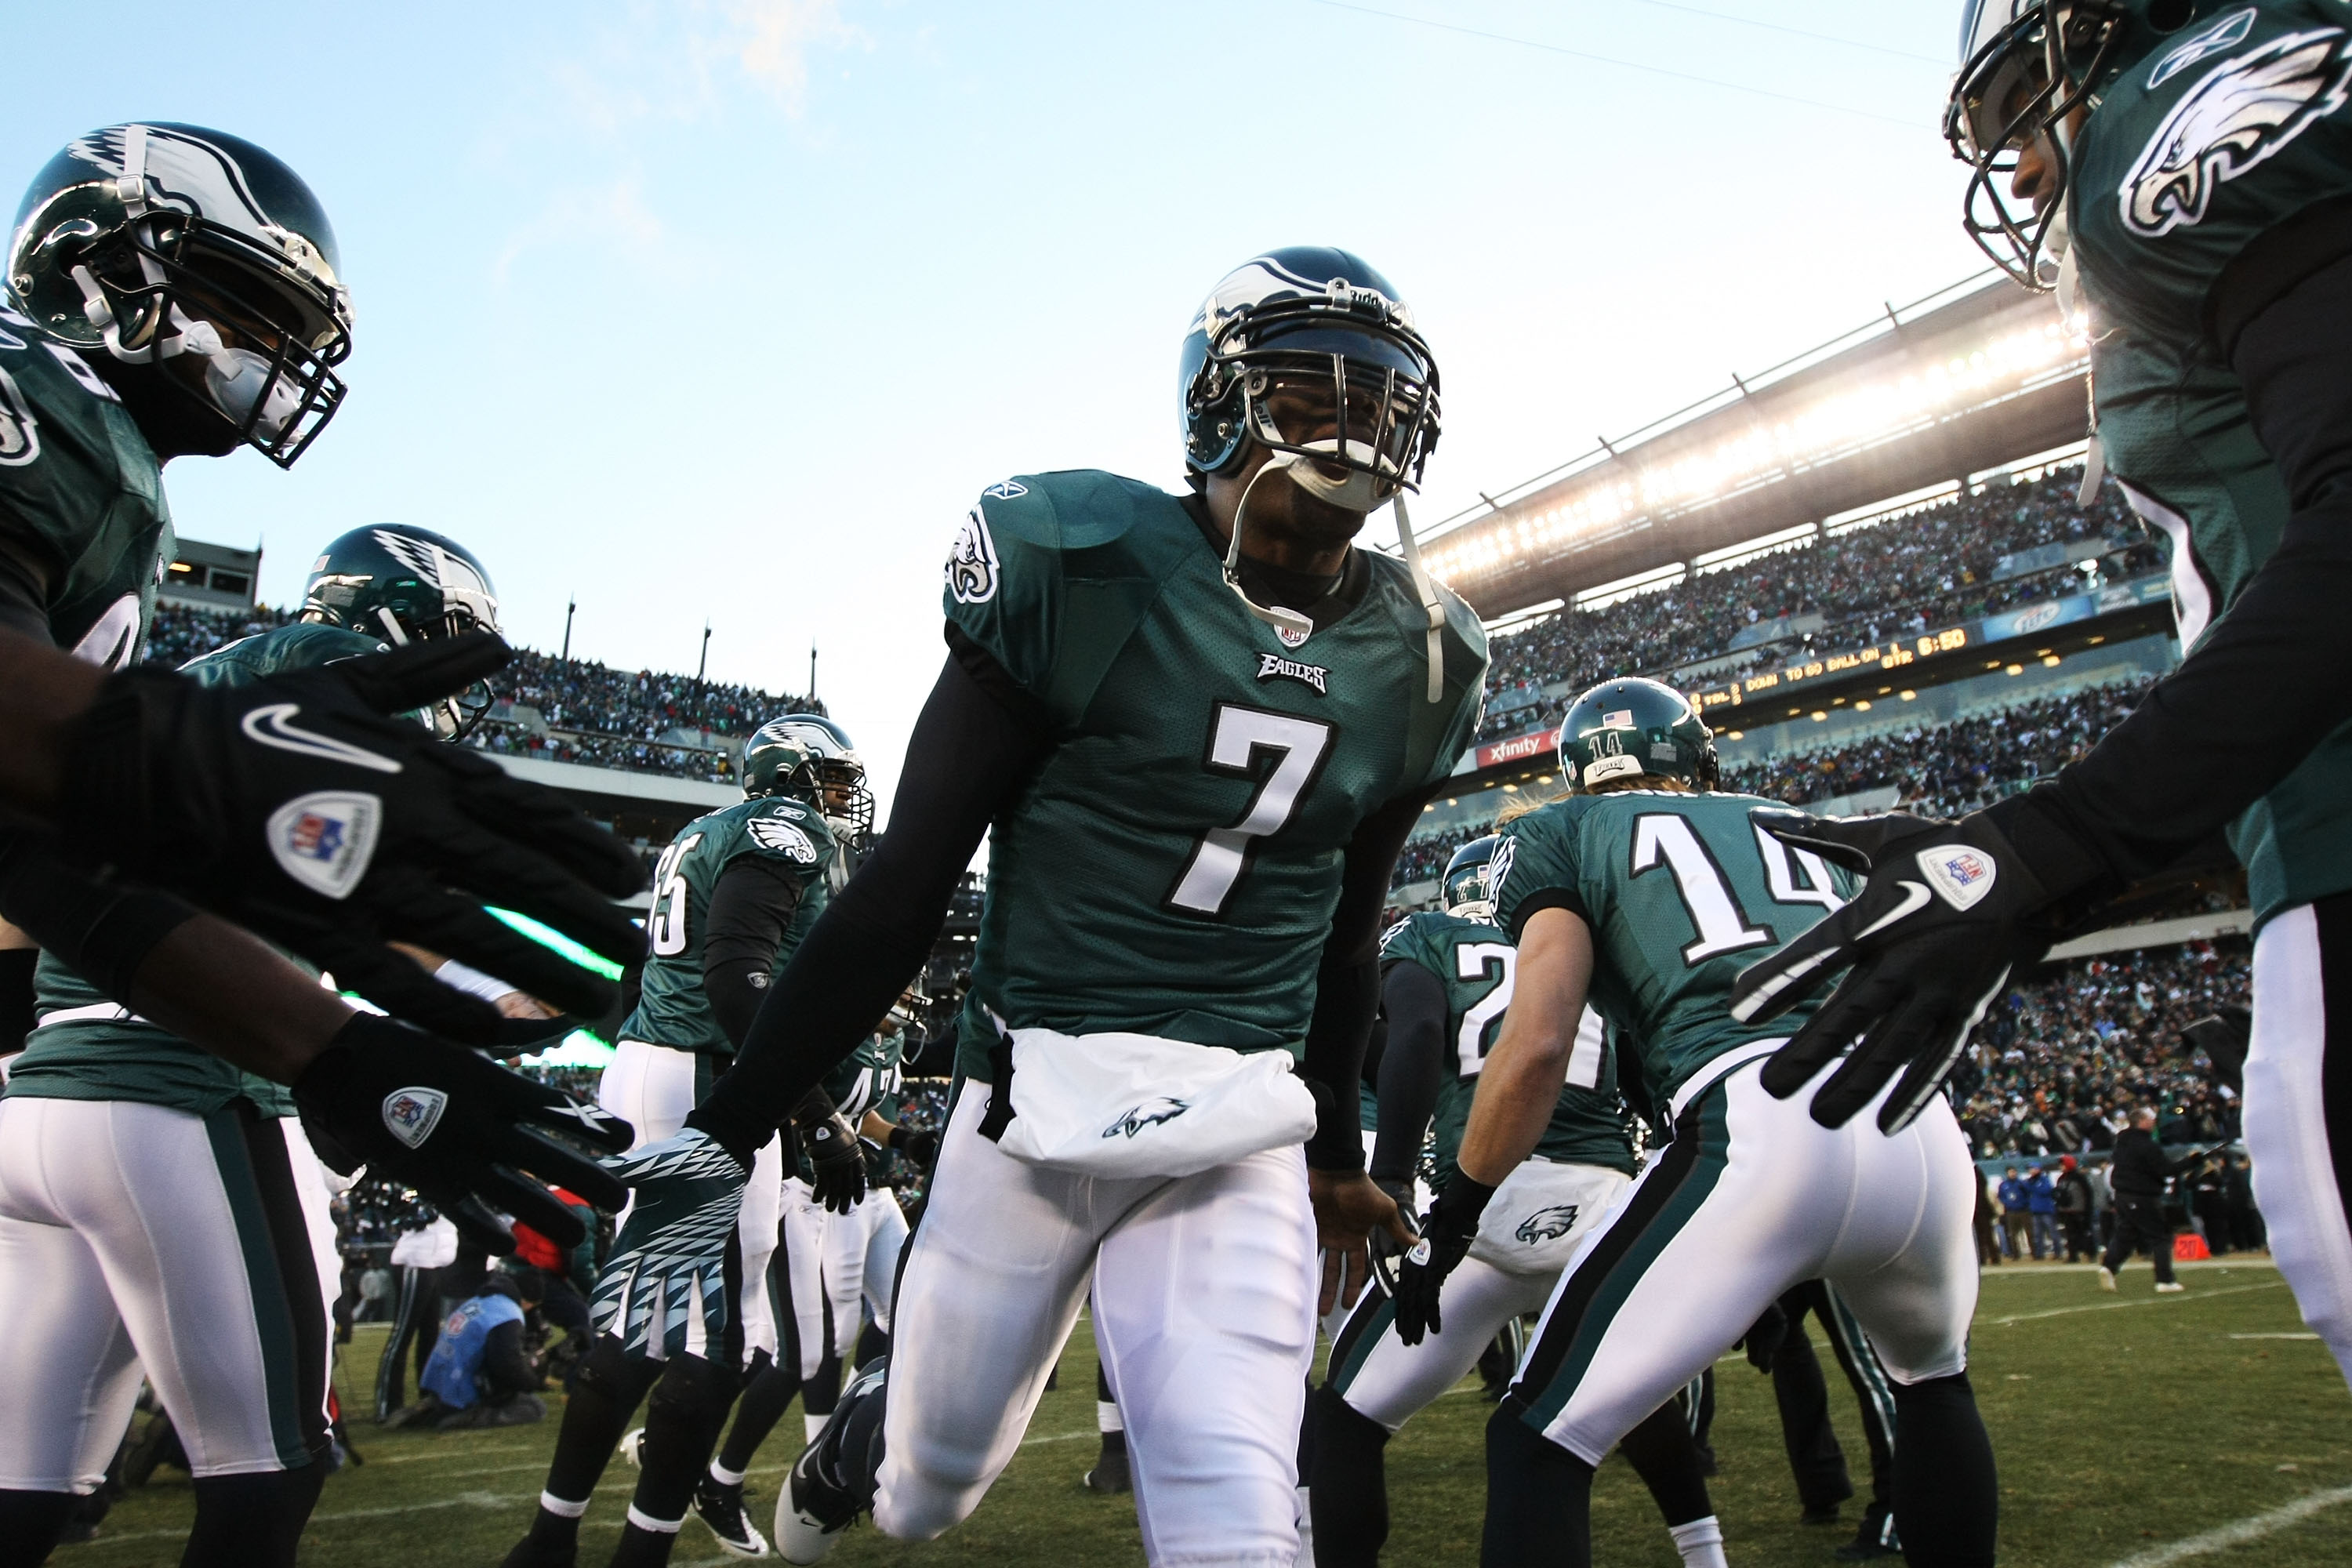 Michael Vick's 6-TD game, 10 years later: 'You can't play much